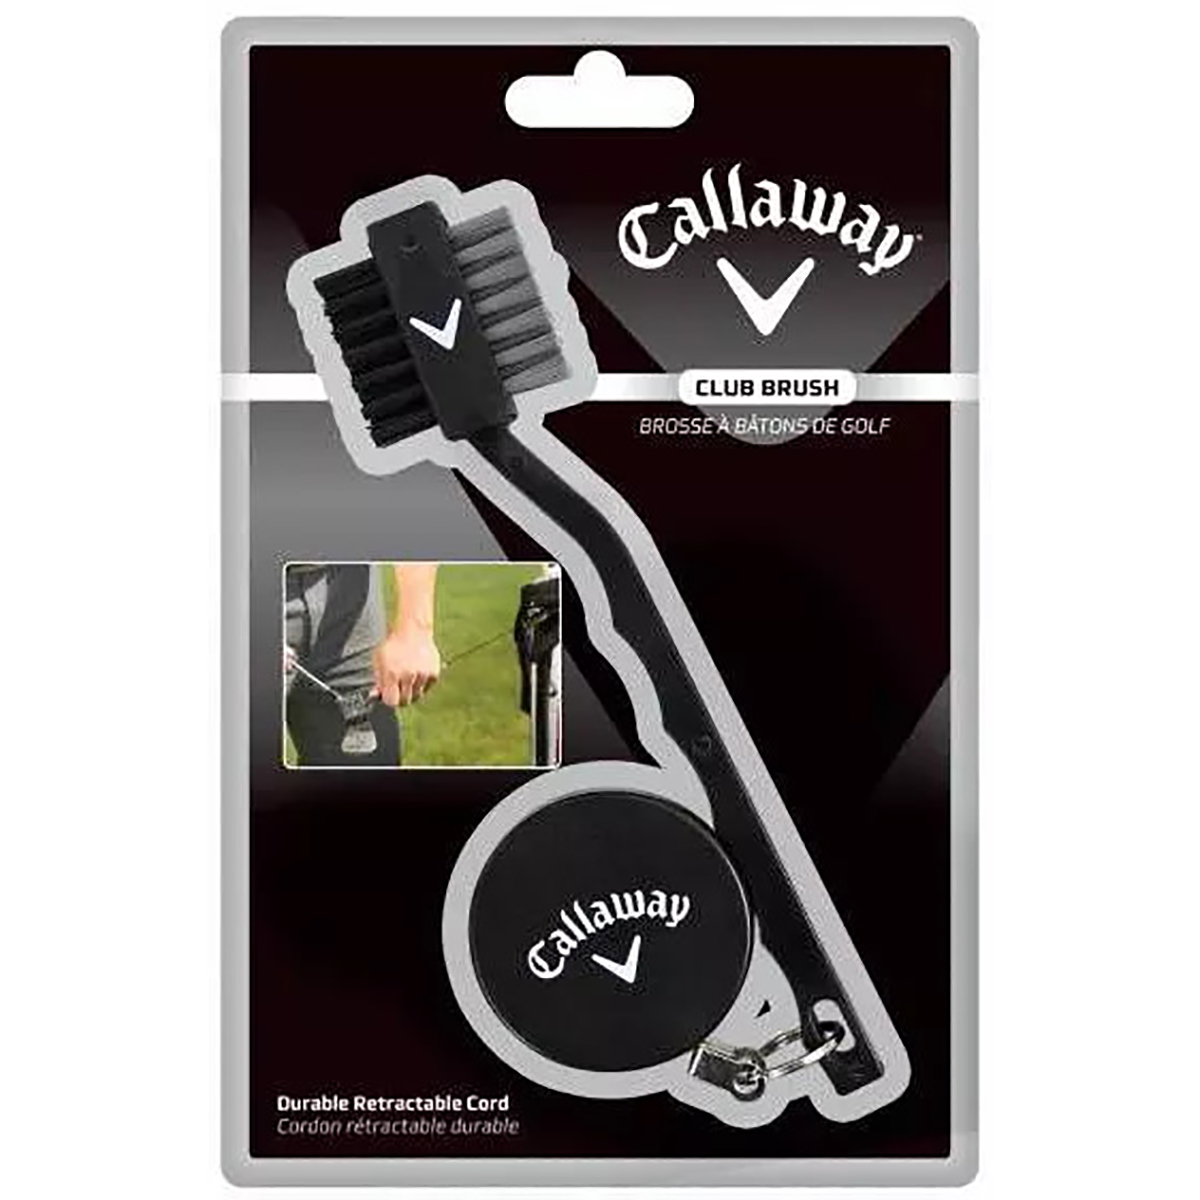 Callaway Golf Club Brush, with Spring-Loaded Retractable Cord - image 3 of 3